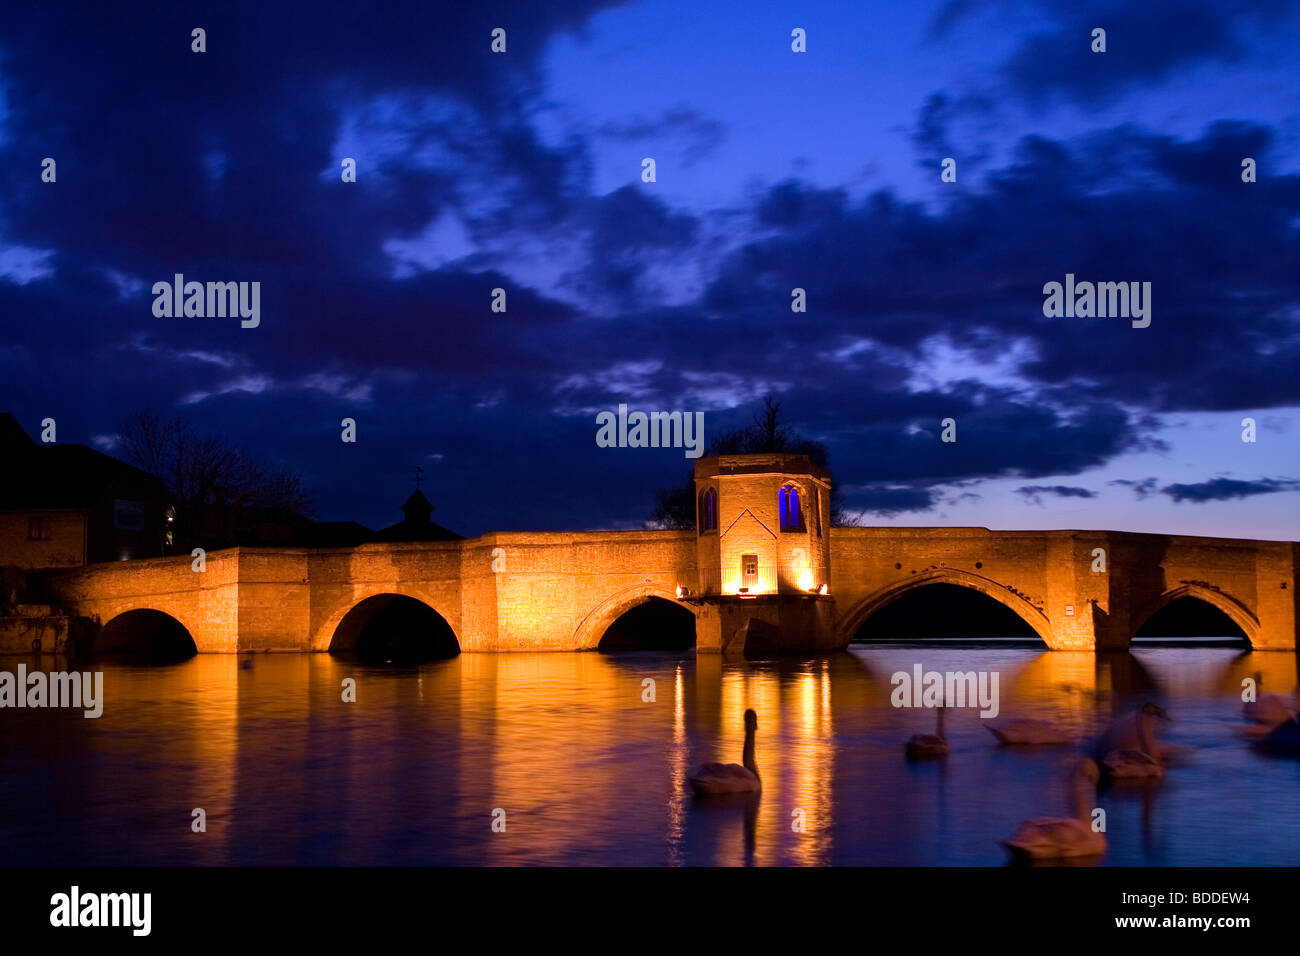 St Ives Bridge with a twilight sky and night time illuminations Stock Photo